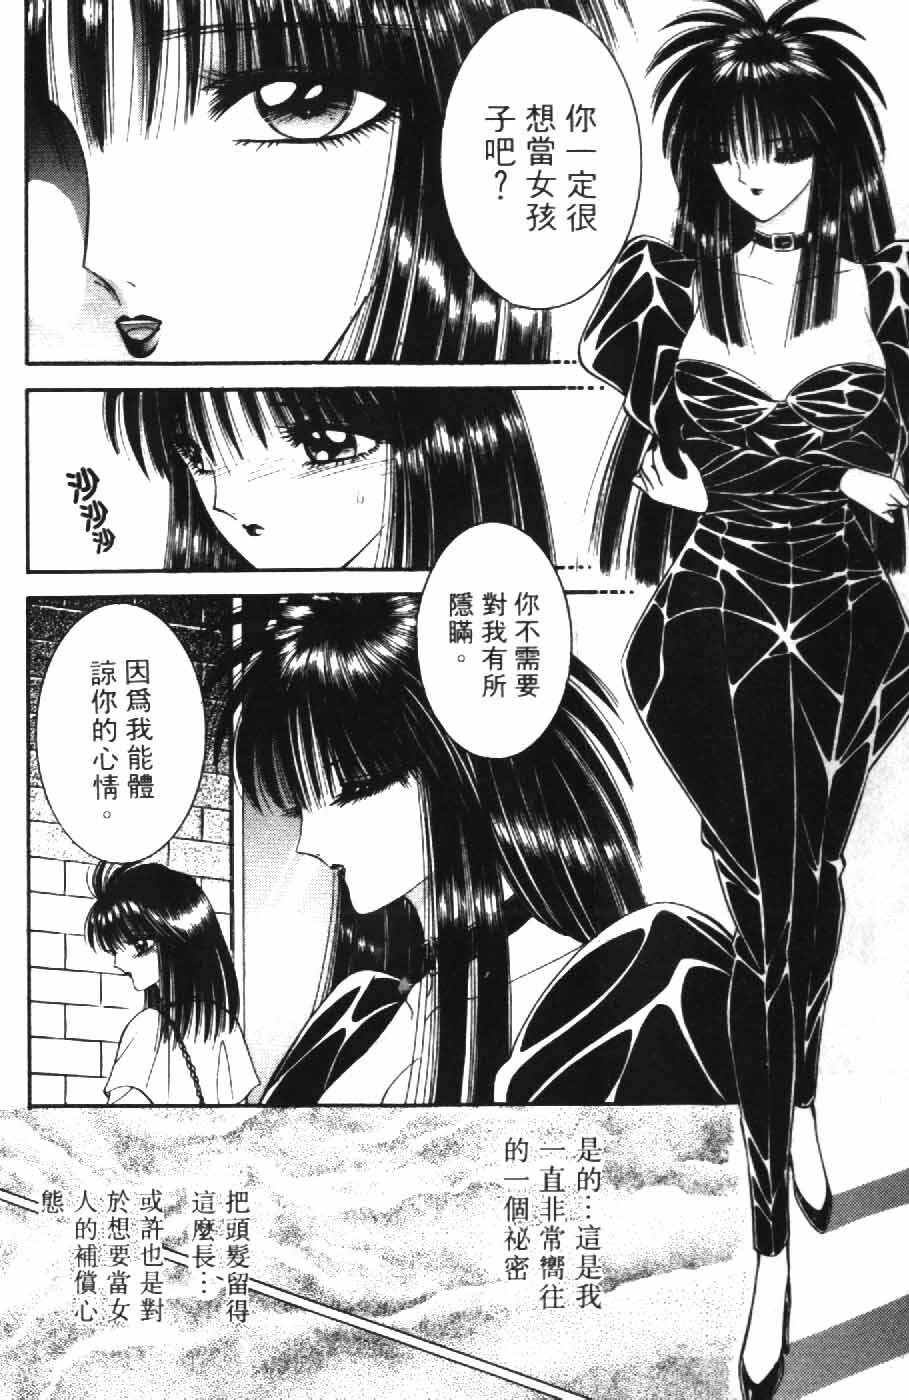 [Senno Knife] Ouma ga Horror Show 2 - Trans Sexual Special Show 2 | 顫慄博覽會 2 [Chinese] page 6 full